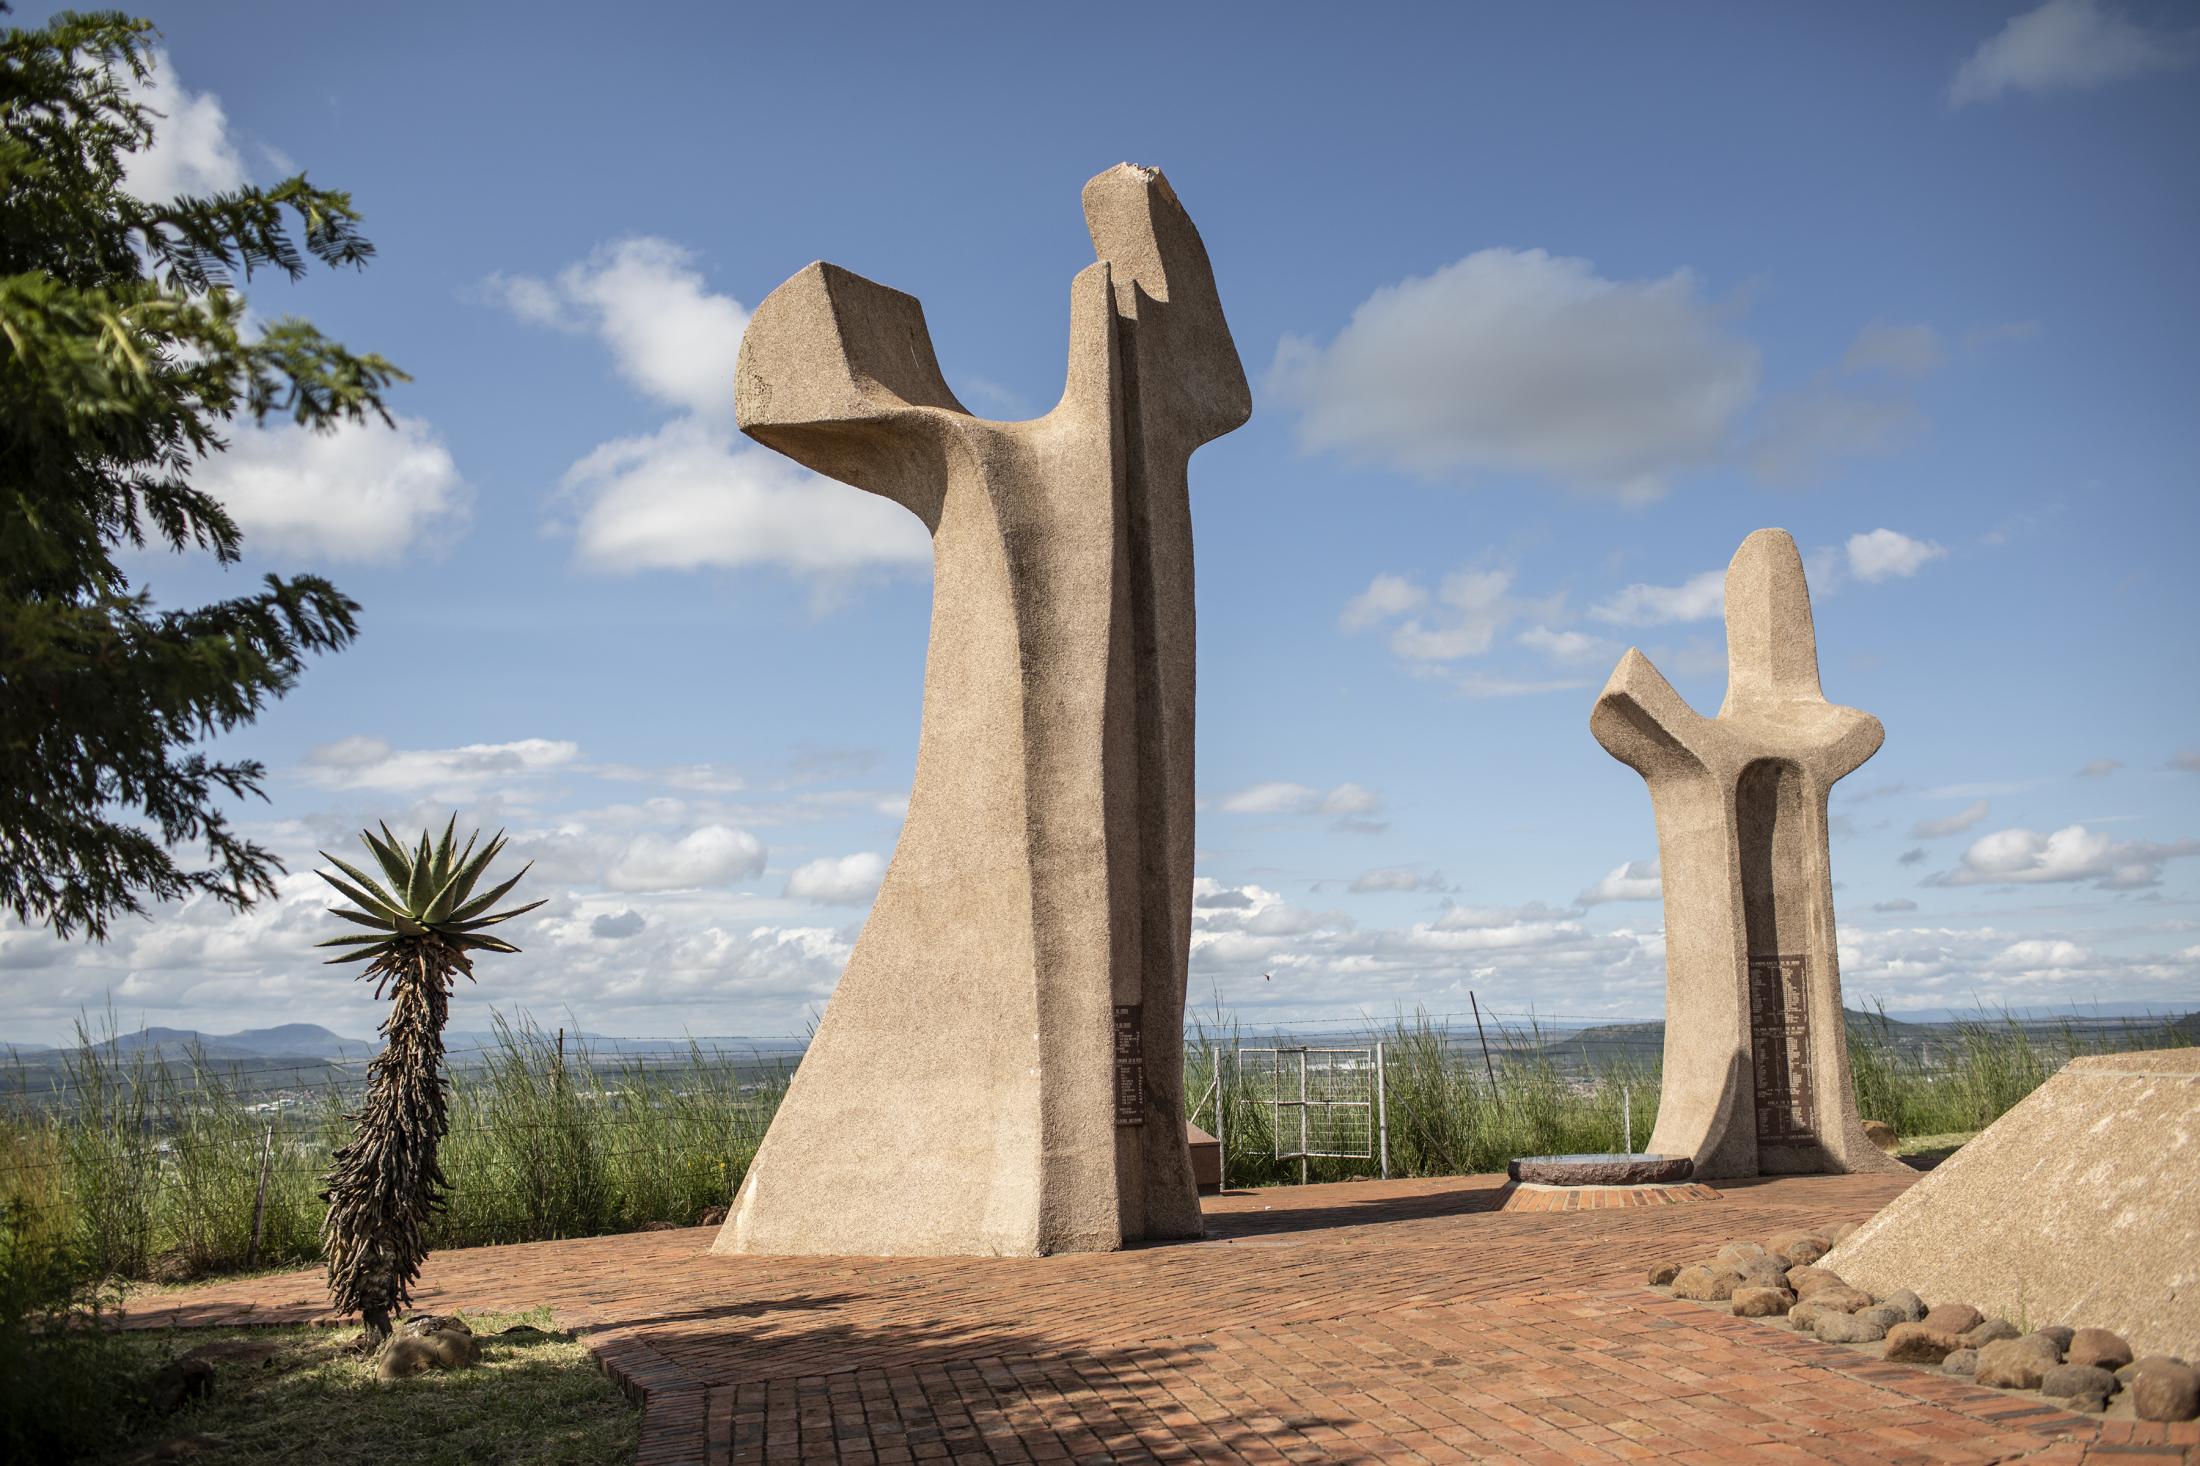 18 February 2020: A well maintained memorial and gravesite for fallen Boer soldiers in Platrand, Ladysmith Kwa-Zulu Natal. These types of monuments were only erected to commemorate white people who were lost in the wars while all non-whites lie in unmarked graves all over the town.